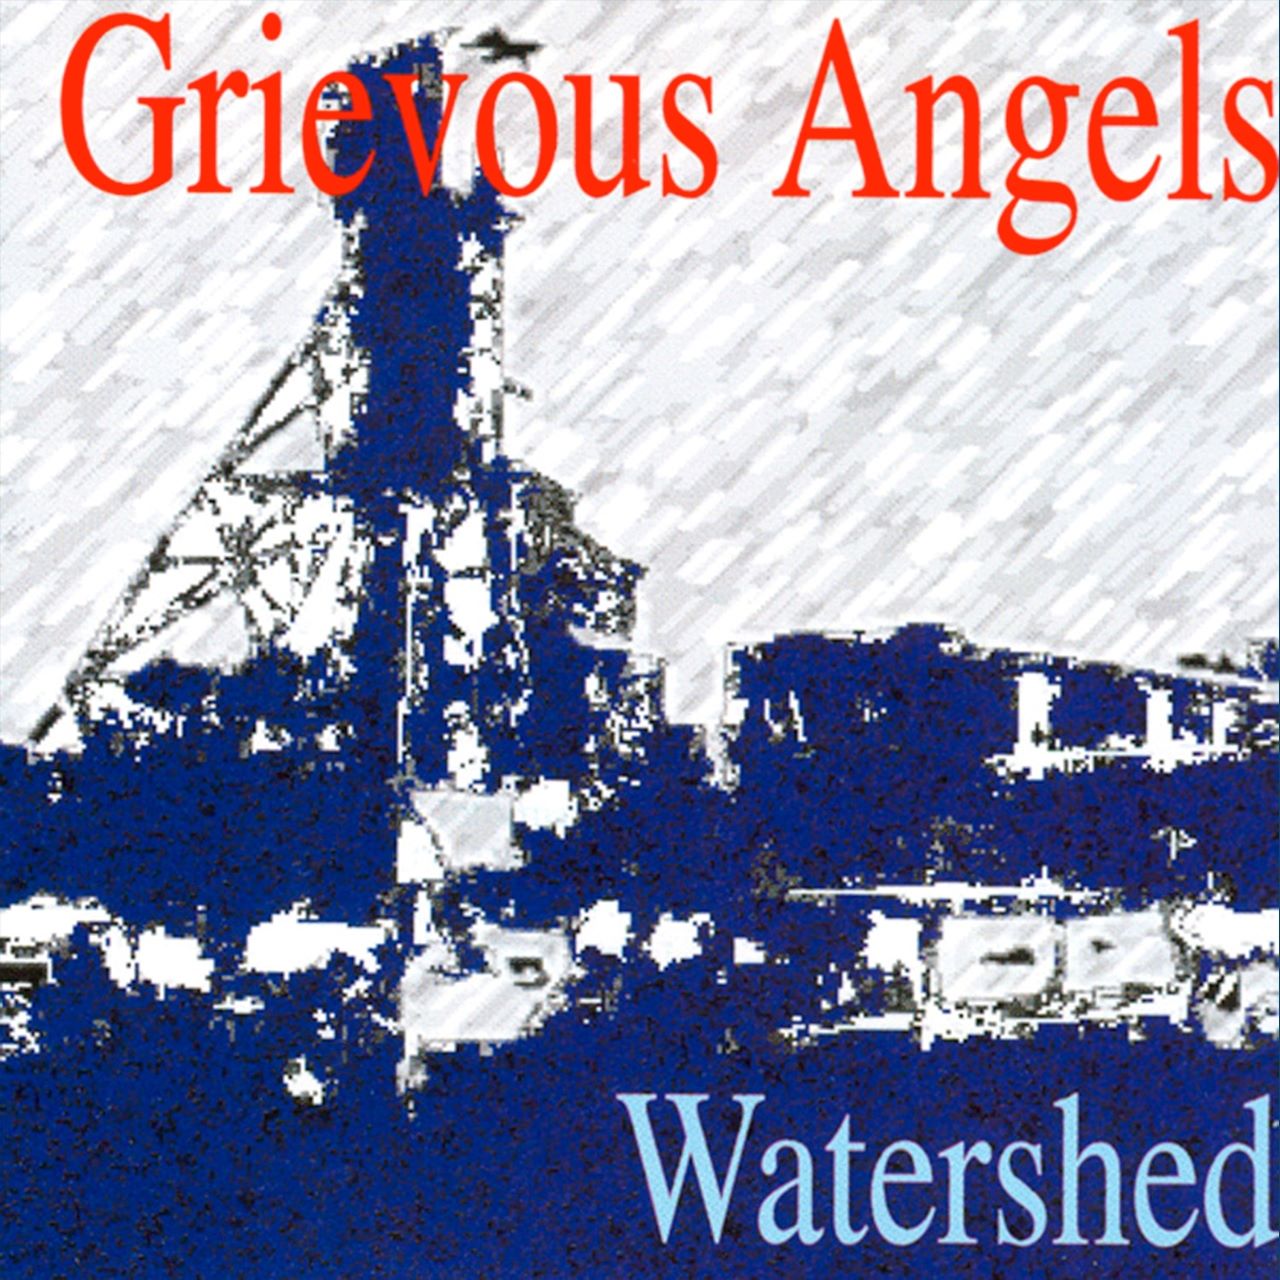 Grievous Angels - Watershed cover album